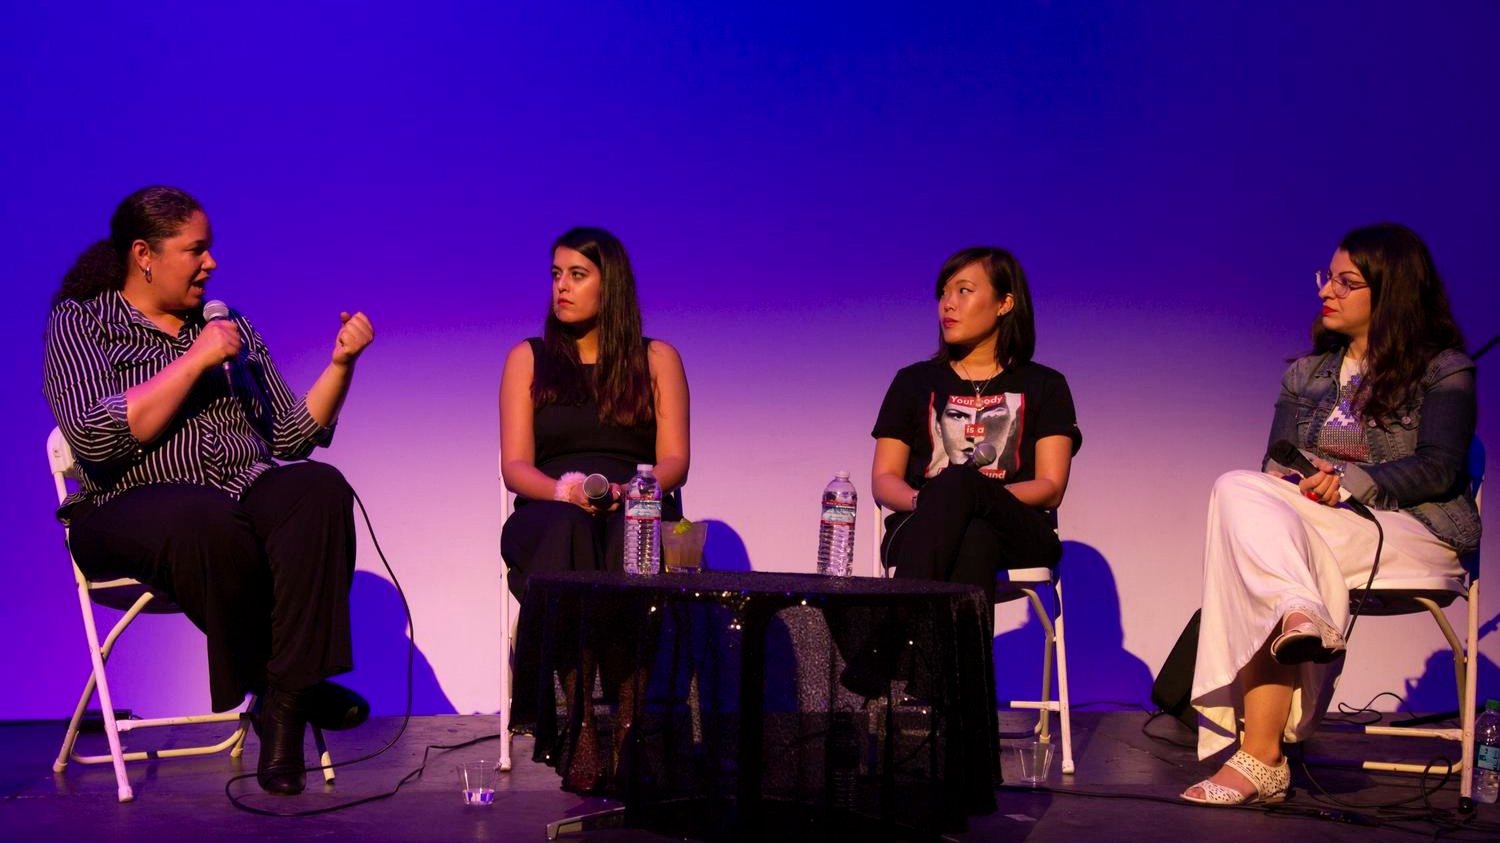  Building Community panel, moderated by Kamal Sinclair. Pictured from left: Kamal Sinclair, Paisley Smith, Natalie Sun, Anita Sarkeesian. FEMMEBIT Festival 2019. 